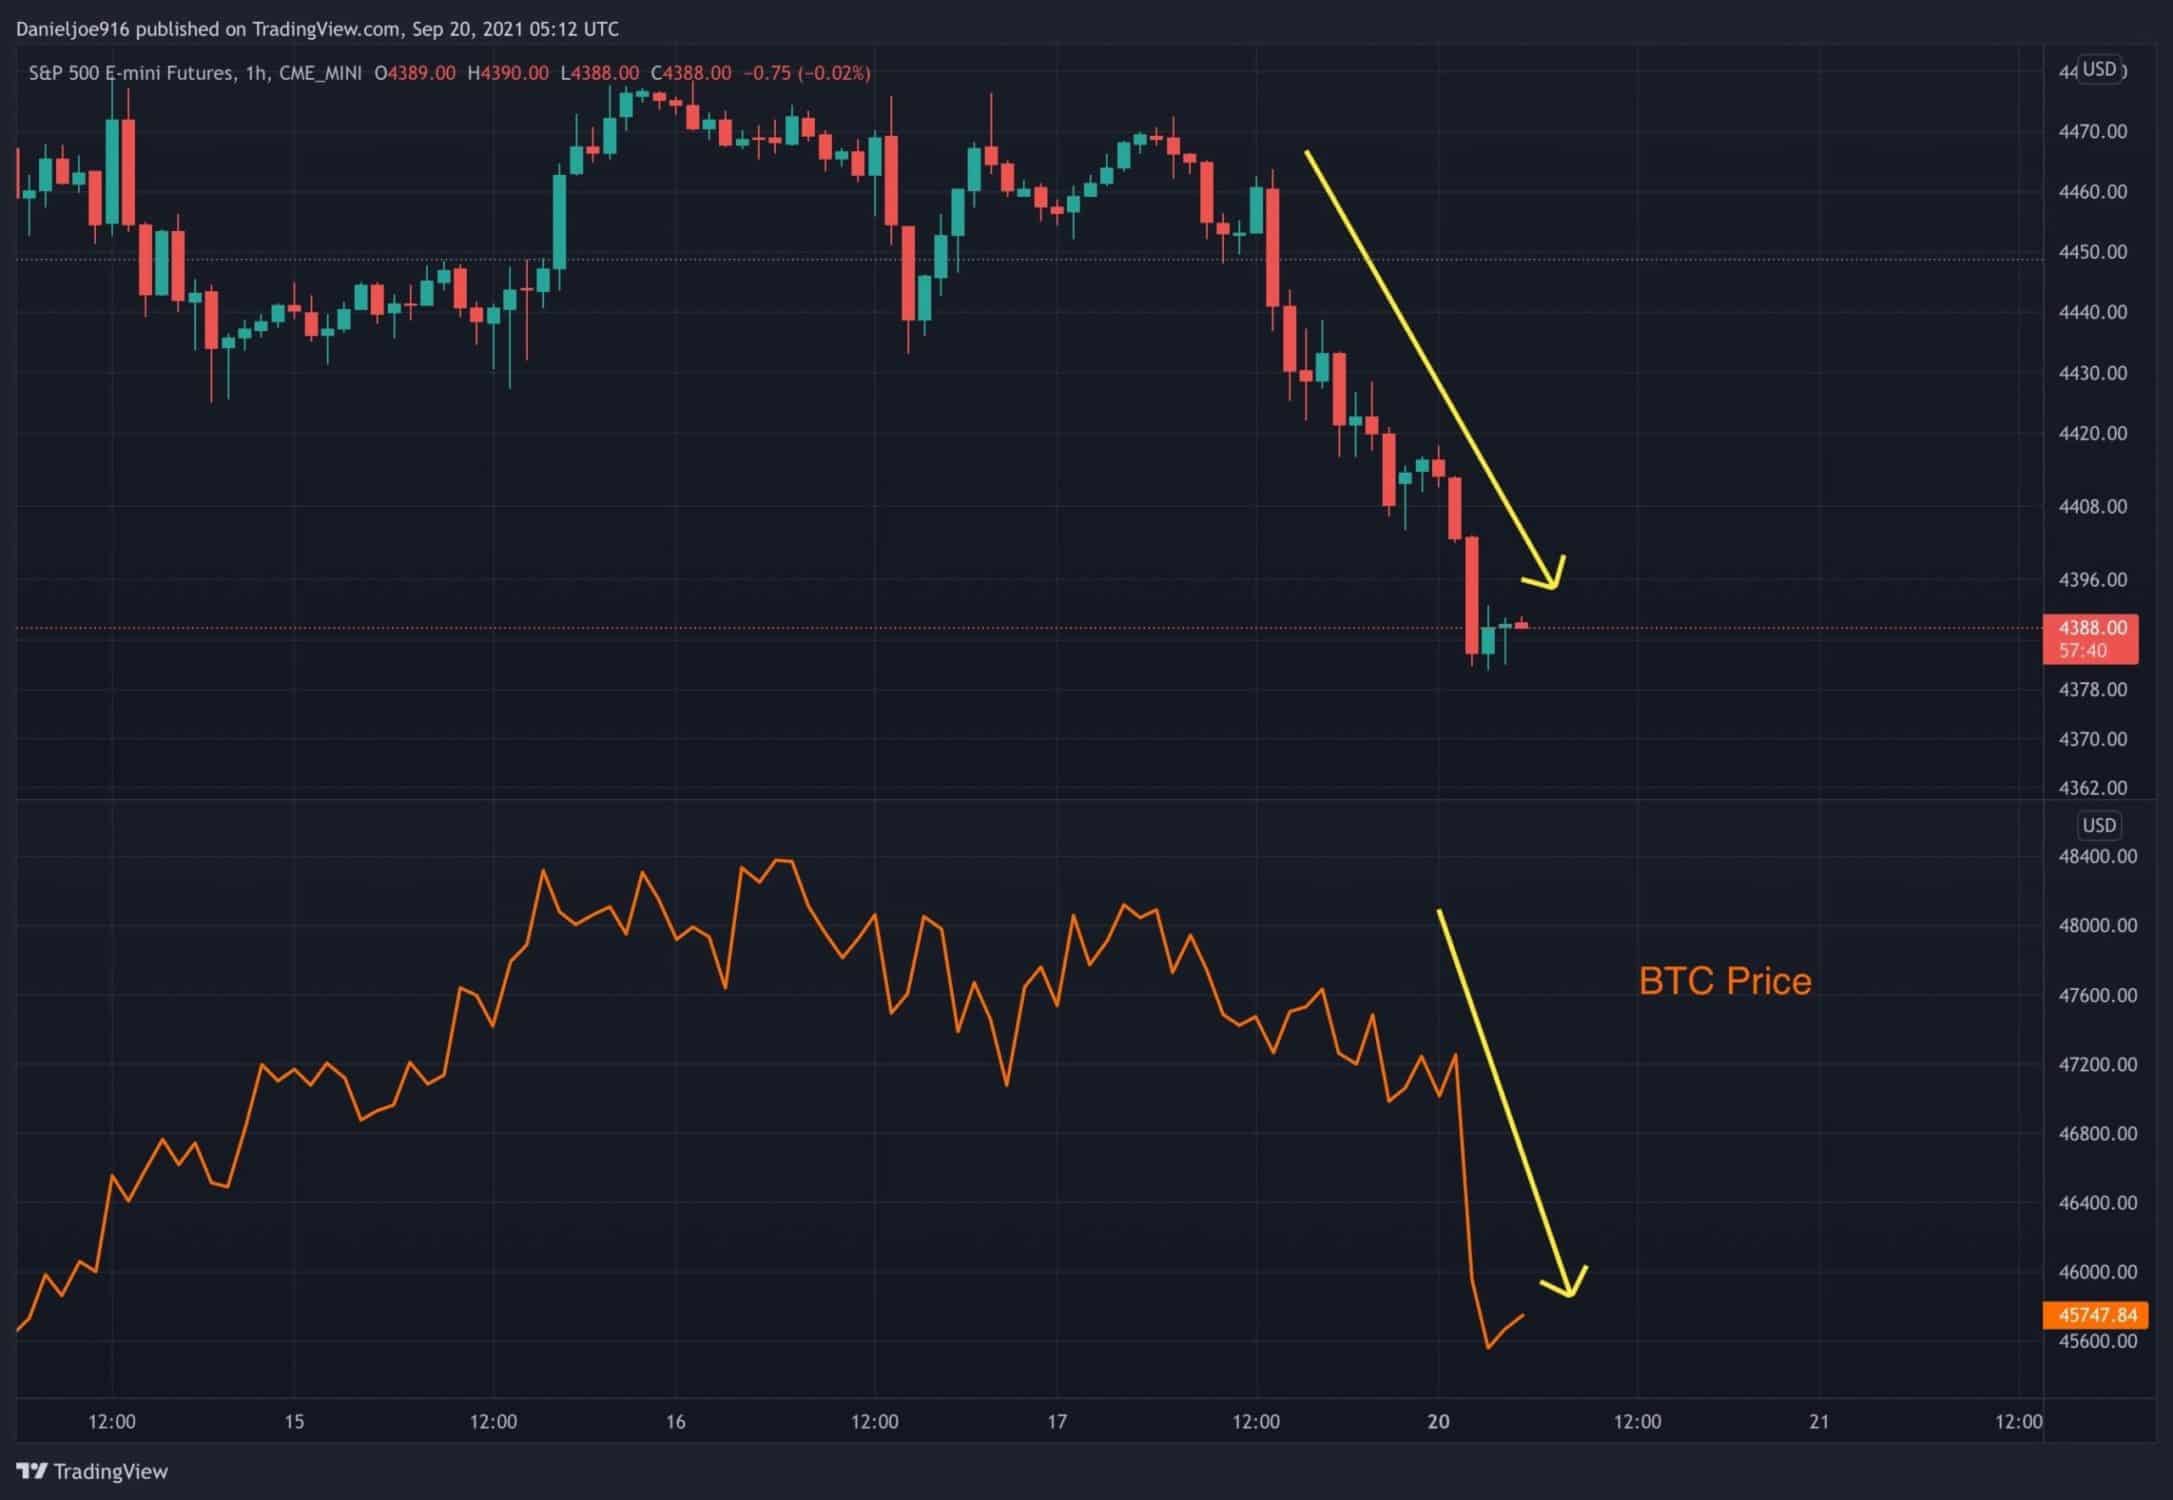 Bitcoin-plunges-on-global-stocks-crash,-where-is-the-next-critical-support?-(btc-price-analysis)